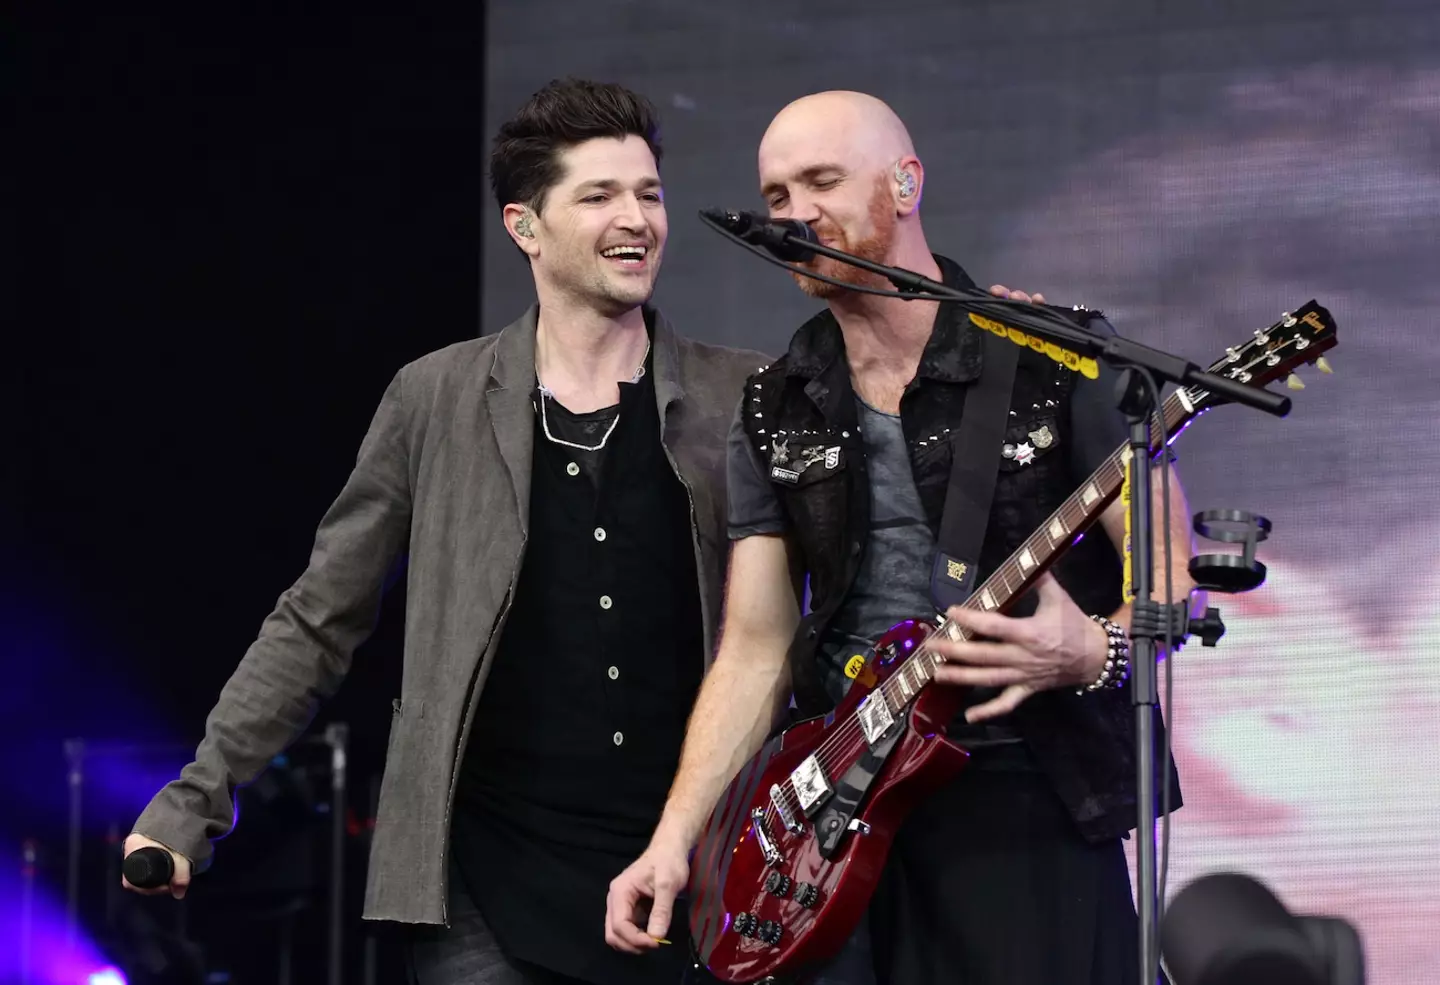 Sheehan formed the band alongside frontman Danny O’Donoghue and drummer Glen Power in 2001.